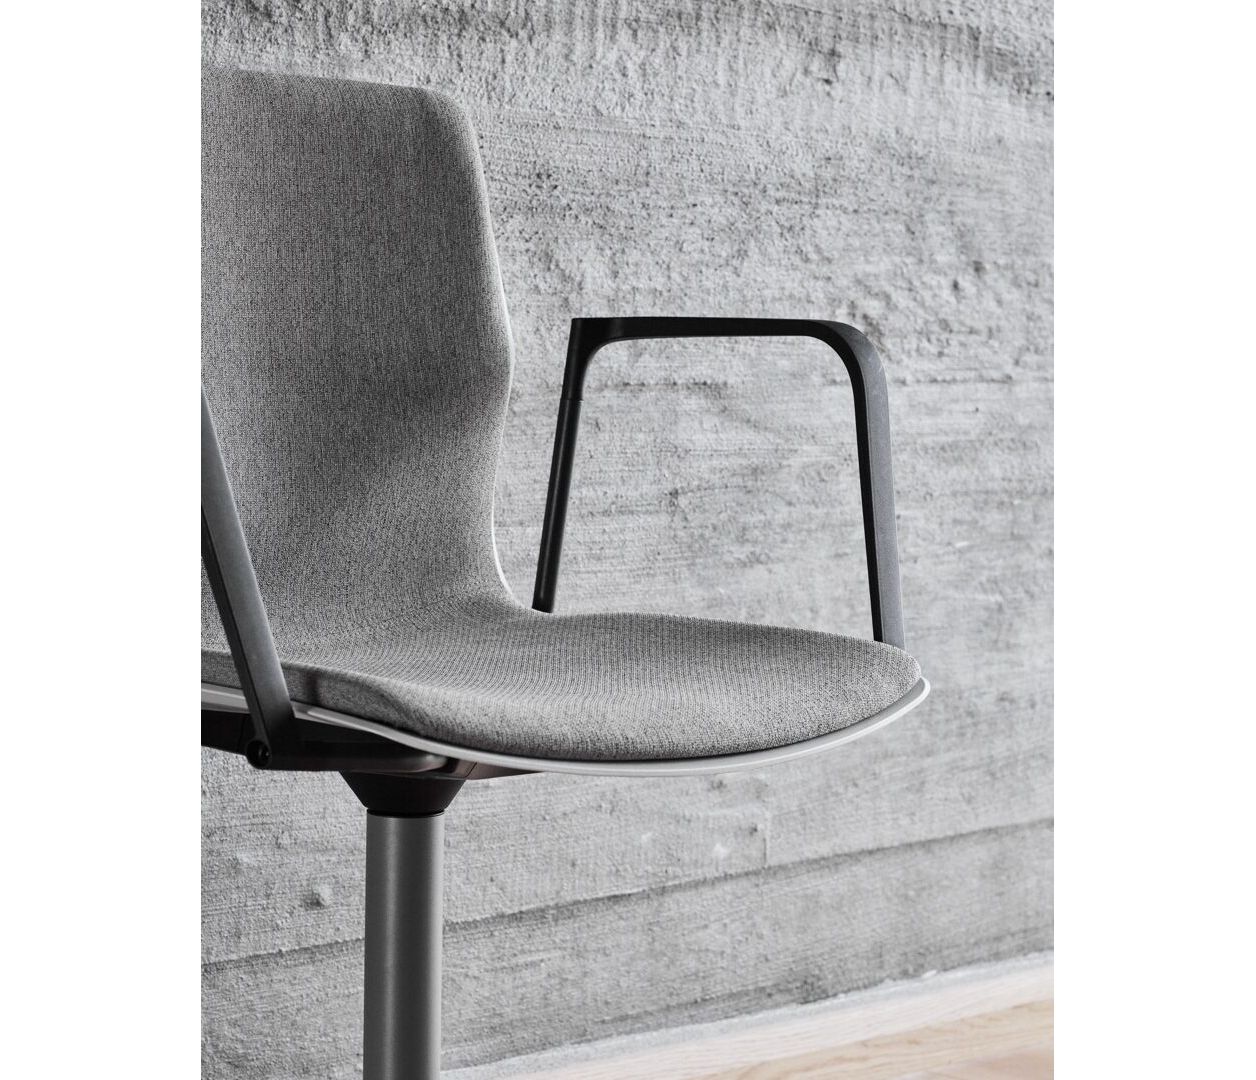 OCEE&FOUR – Chairs – FourSure 99 – Details Image 1 Large